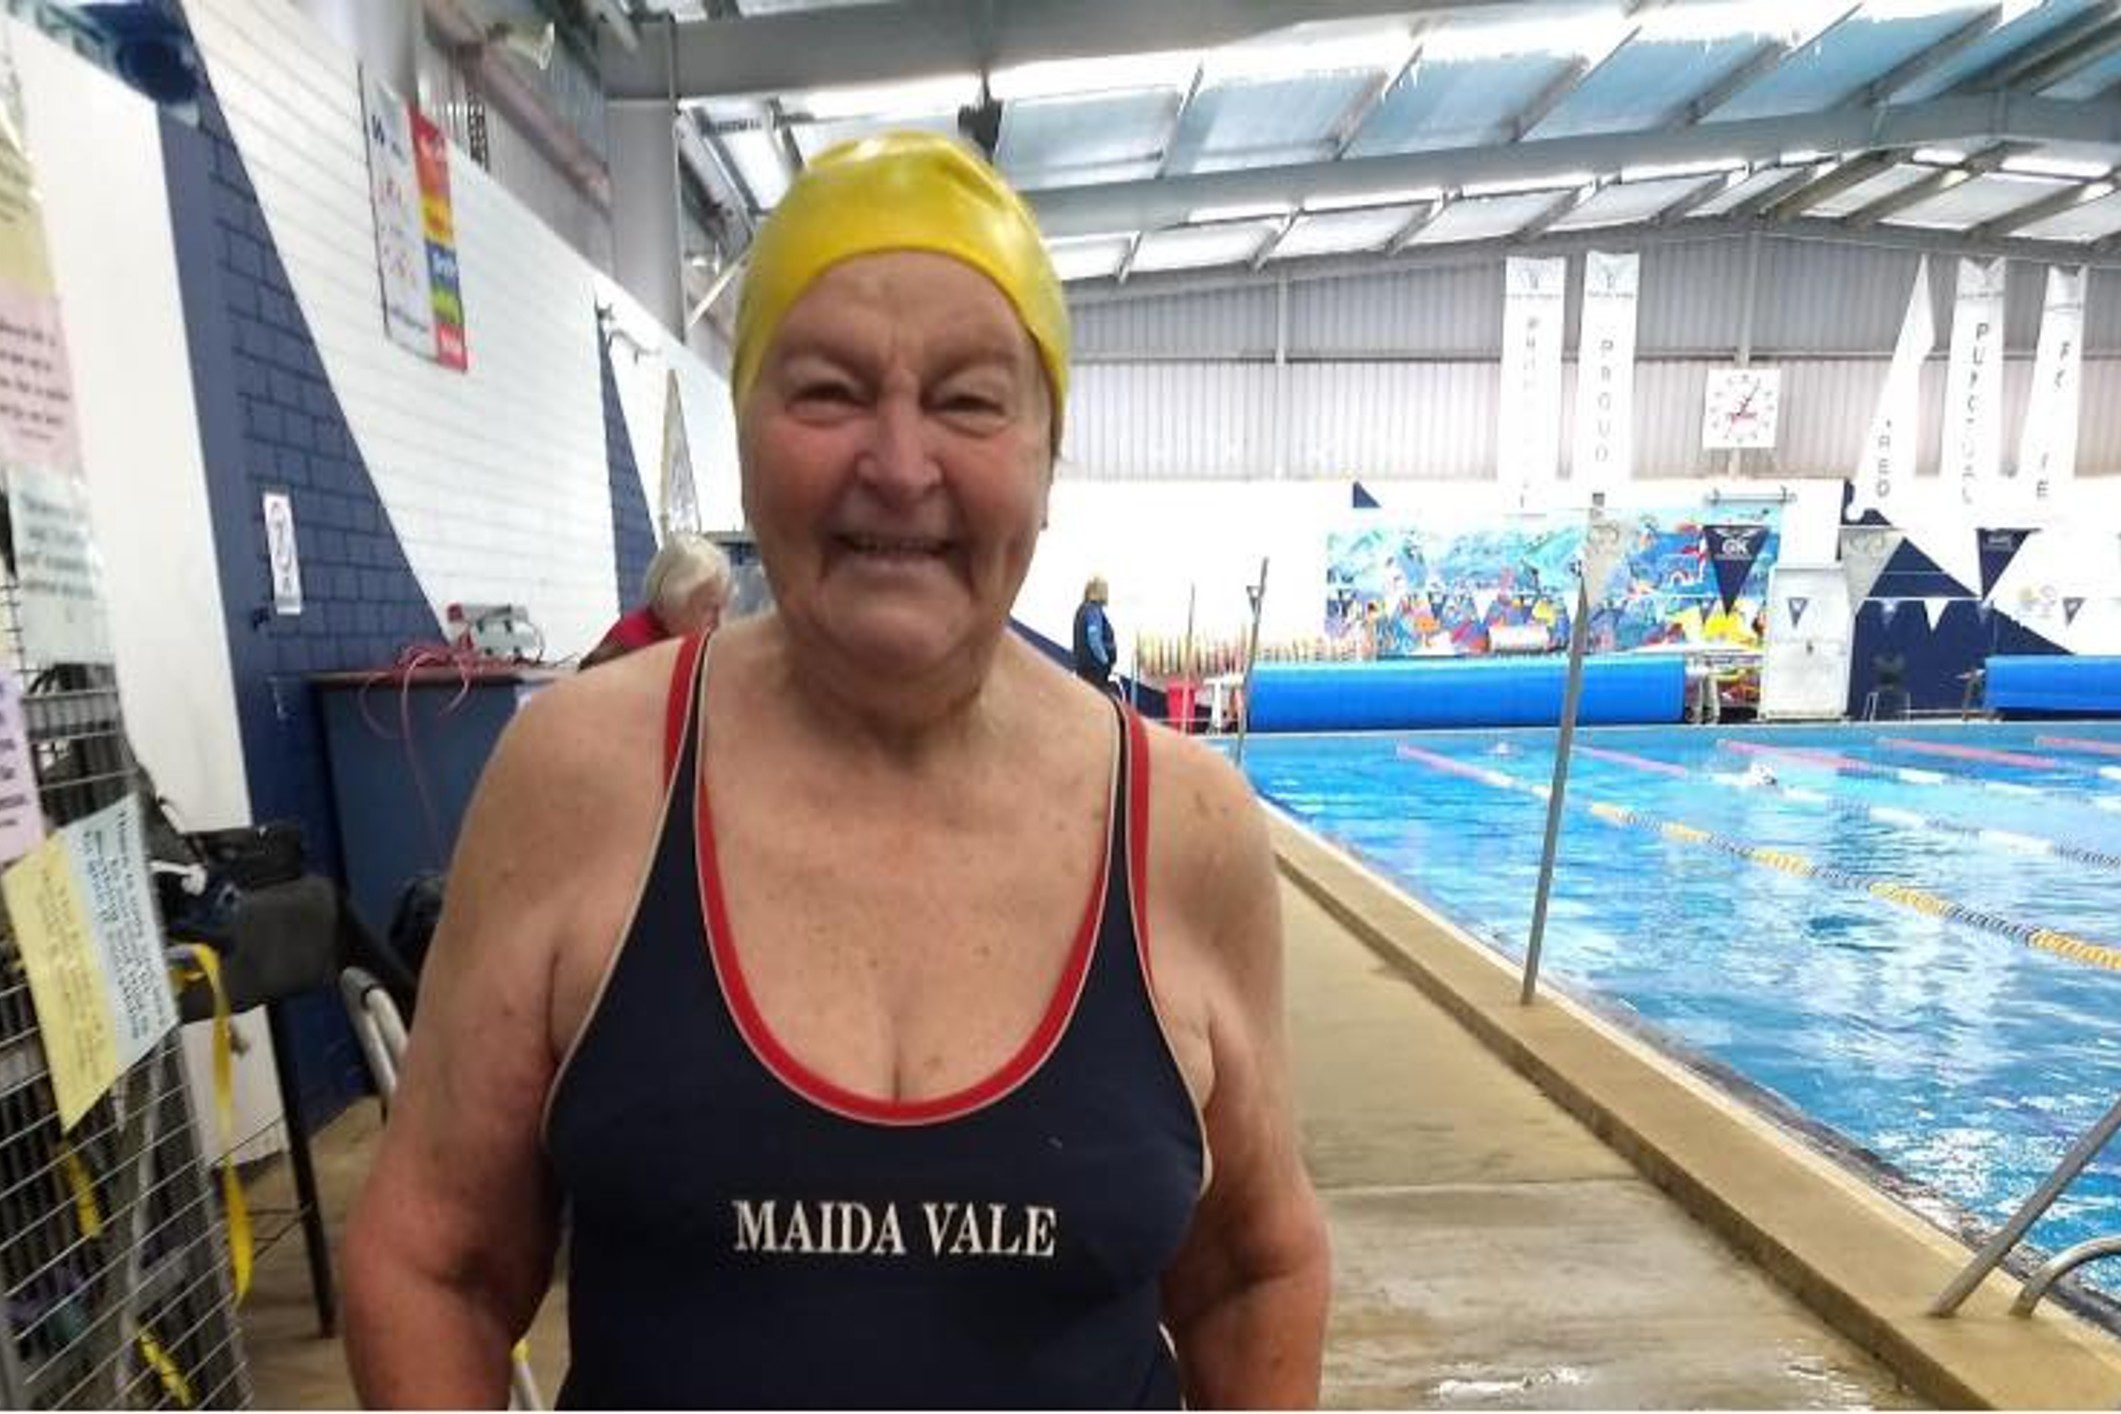 Senior Perth swimmer on song as she notched her 101st record